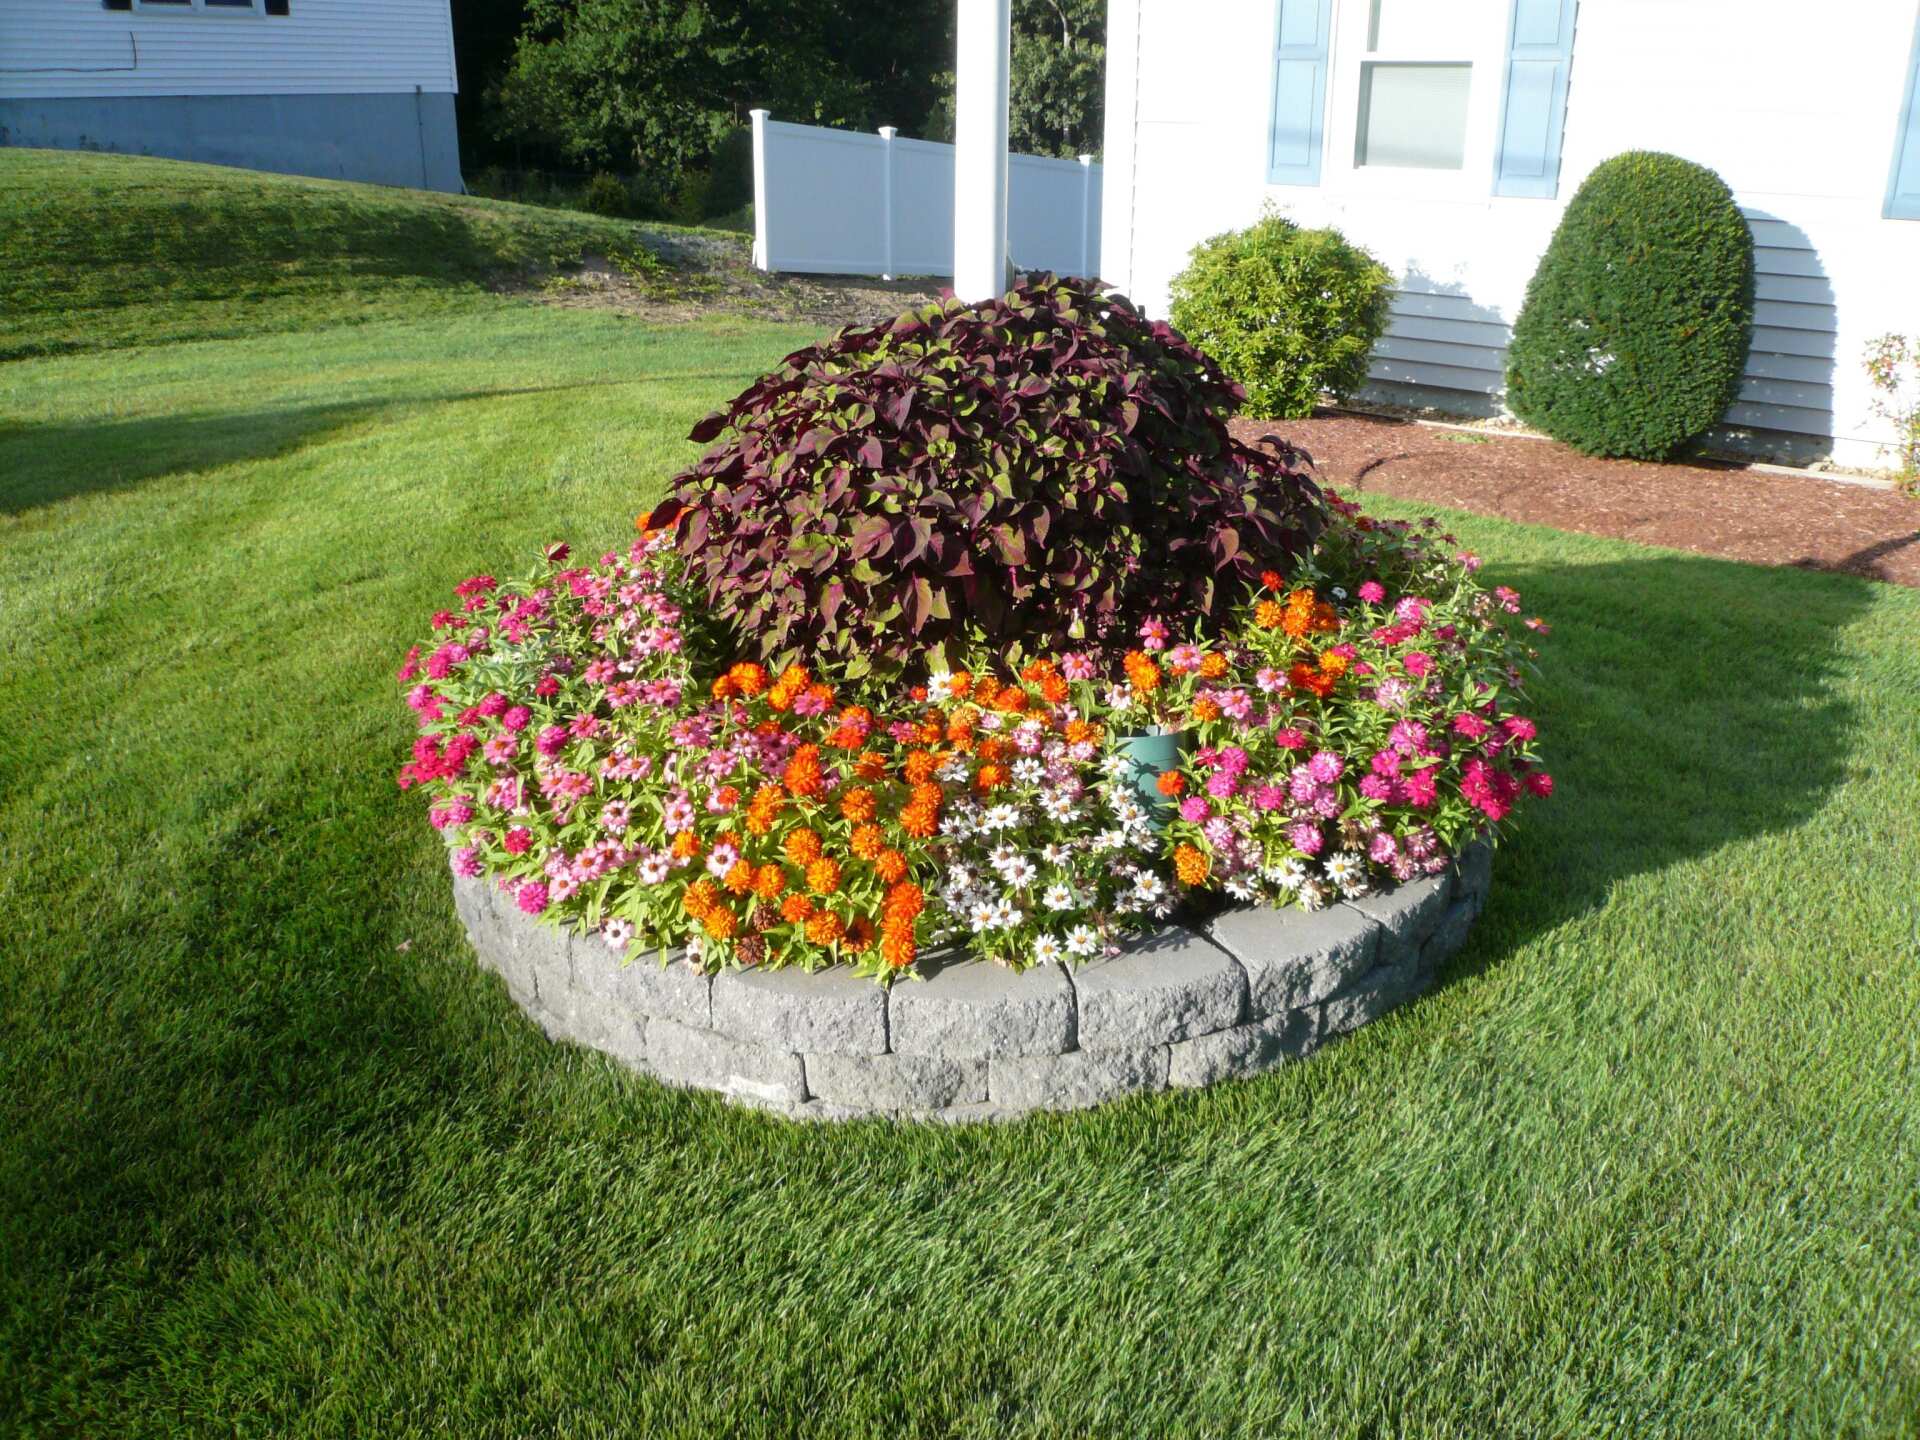 Landscape Design to Highlight a Flagpole